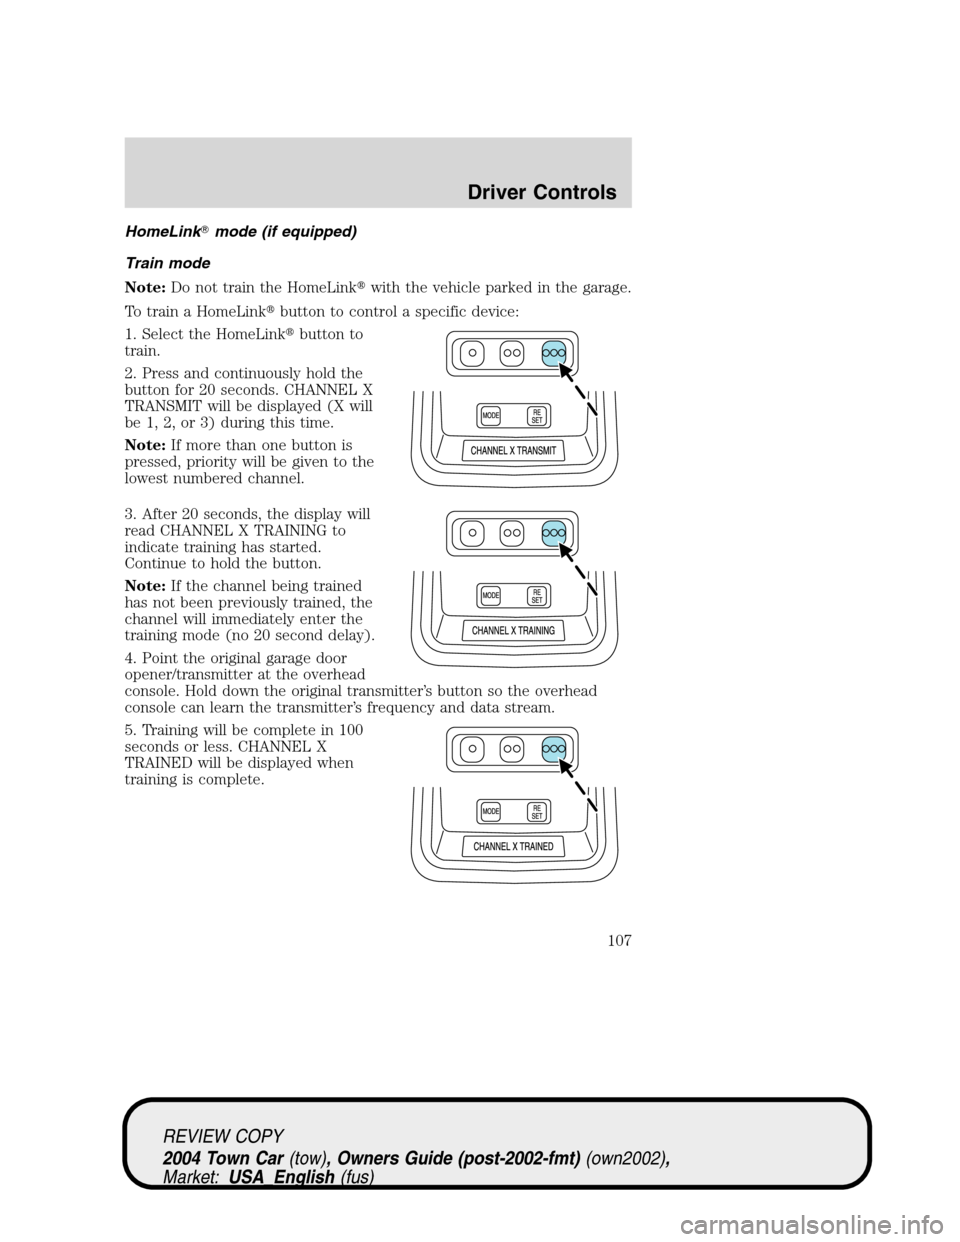 LINCOLN TOWN CAR 2004  Owners Manual HomeLinkmode (if equipped)
Train mode
Note:Do not train the HomeLinkwith the vehicle parked in the garage.
To train a HomeLinkbutton to control a specific device:
1. Select the HomeLinkbutton to
t